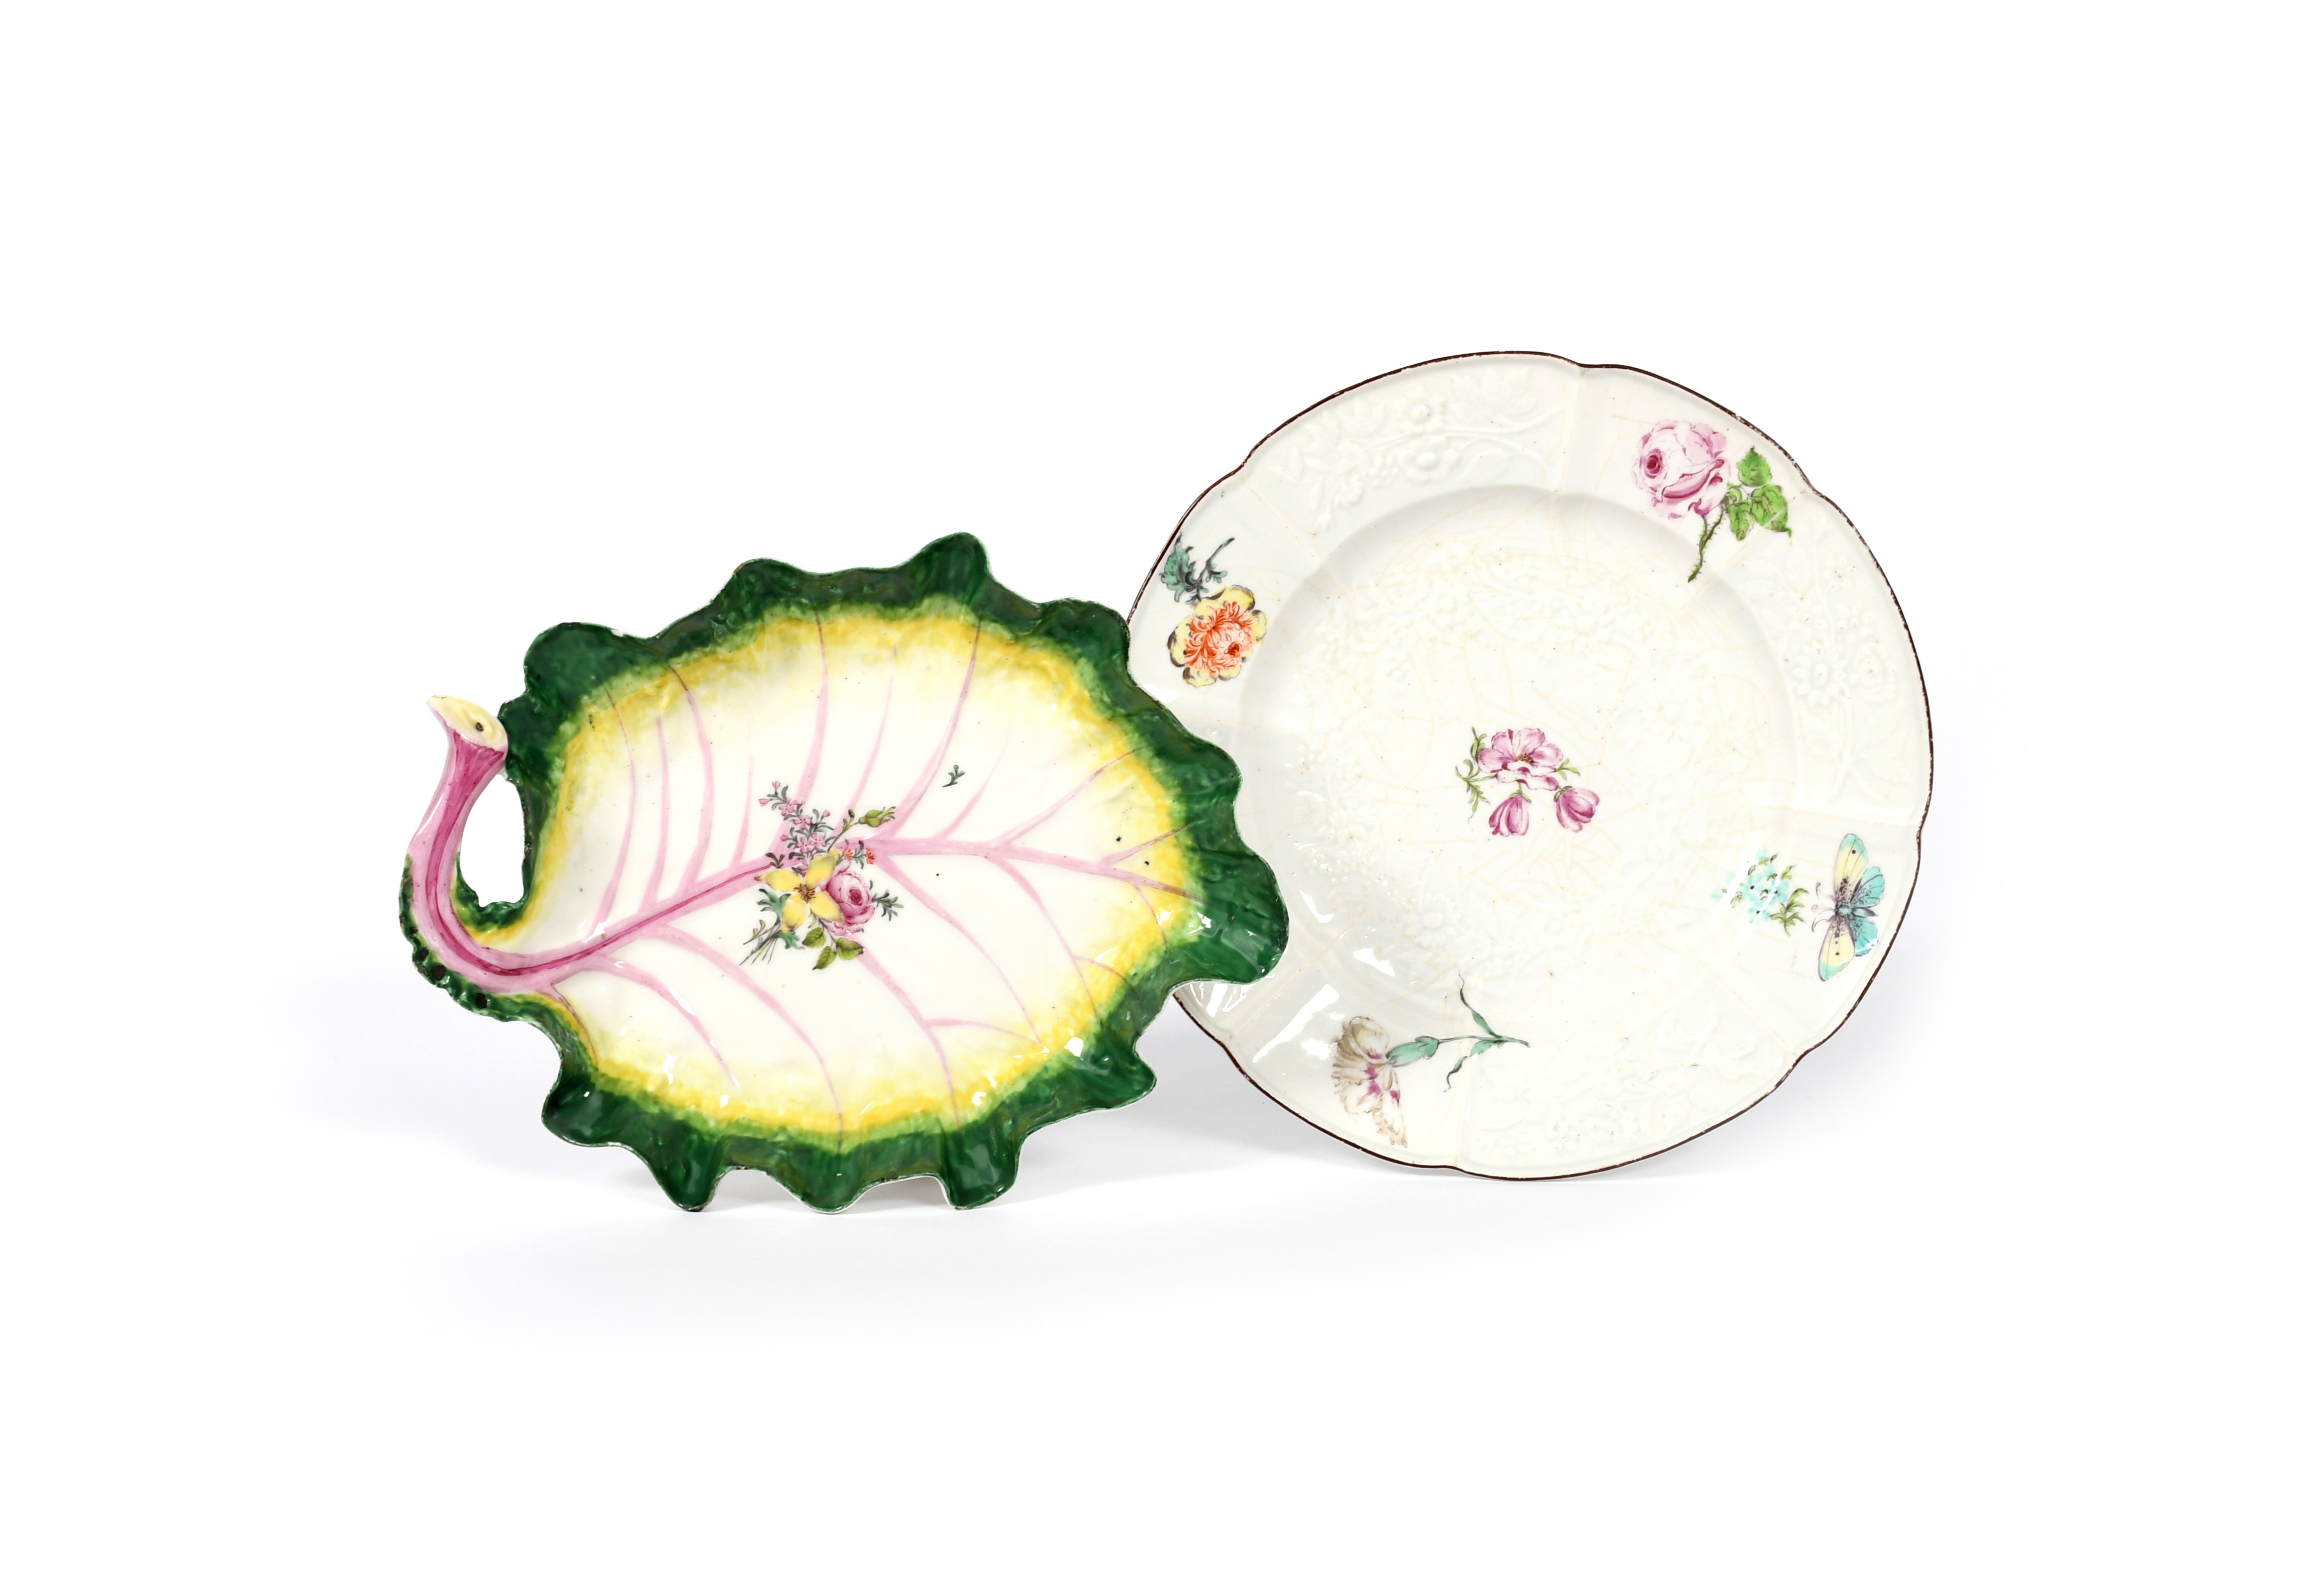 Two Chelsea dishes c.1755-58, one moulded in the Meissen Gotzkowsky manner with a central garland of